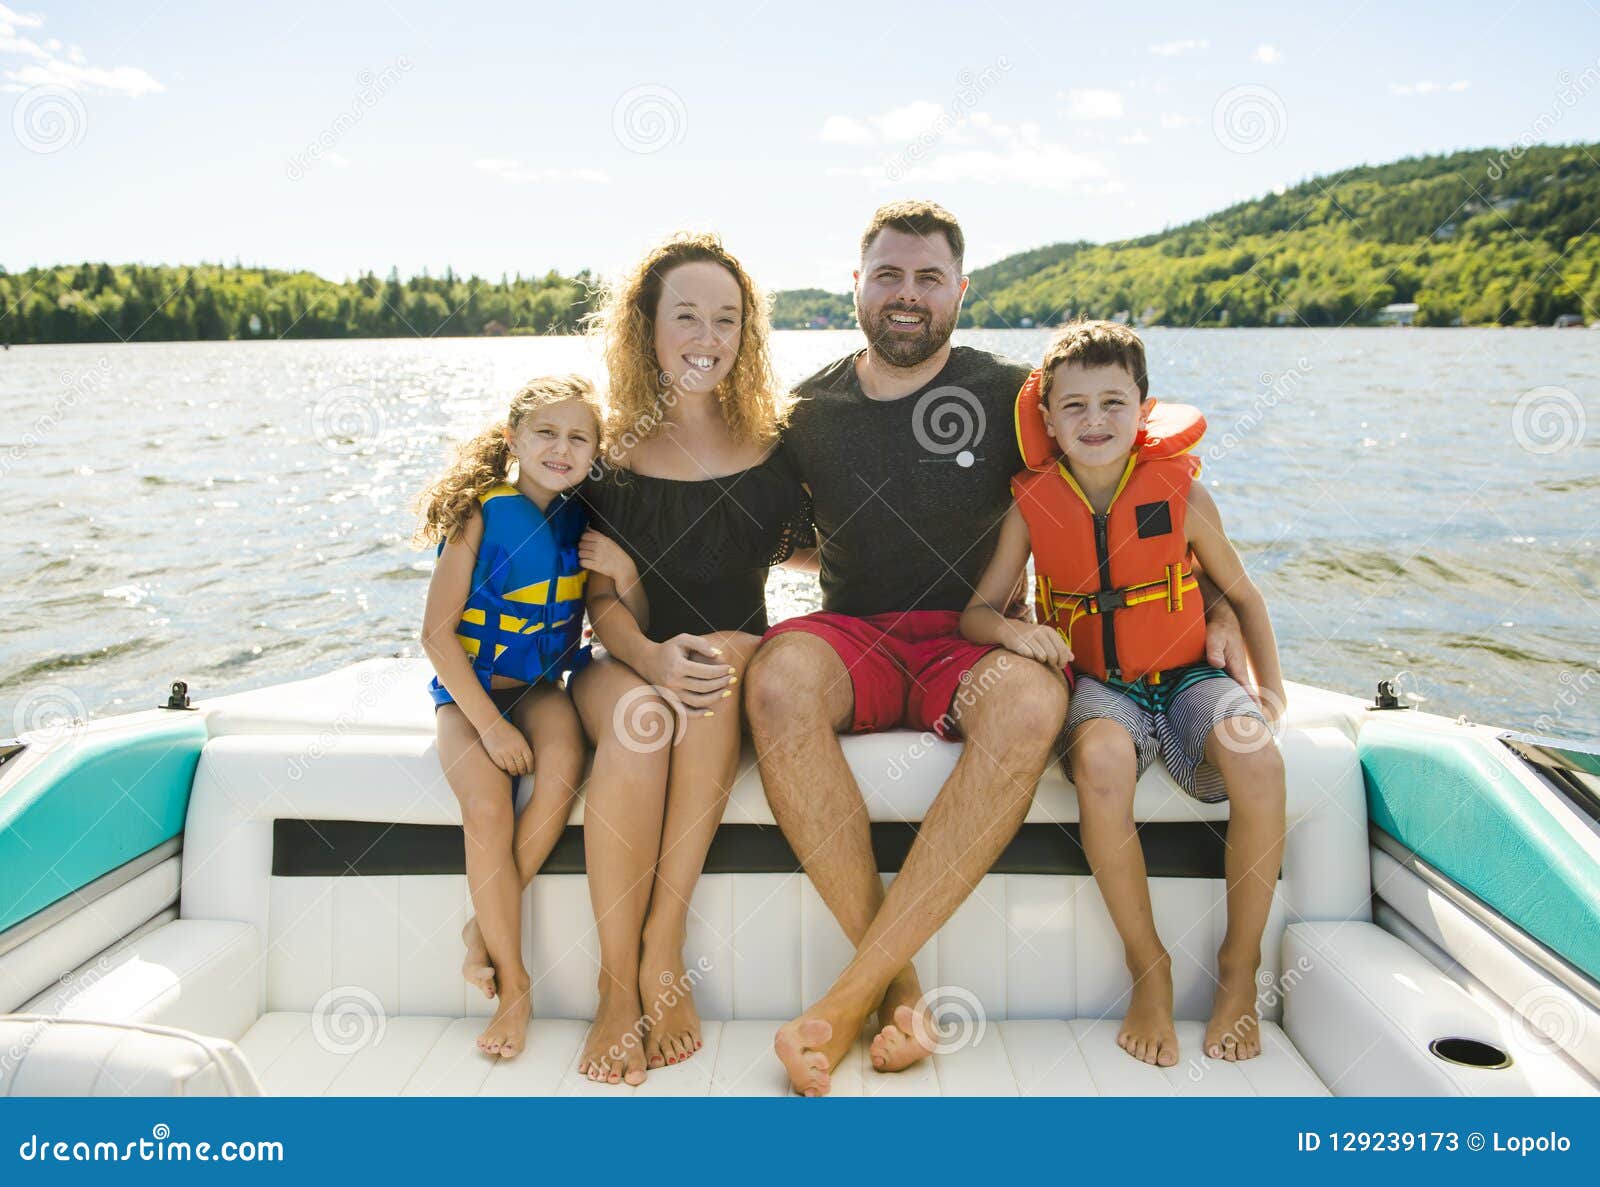 family out boating together having fun on vacancy